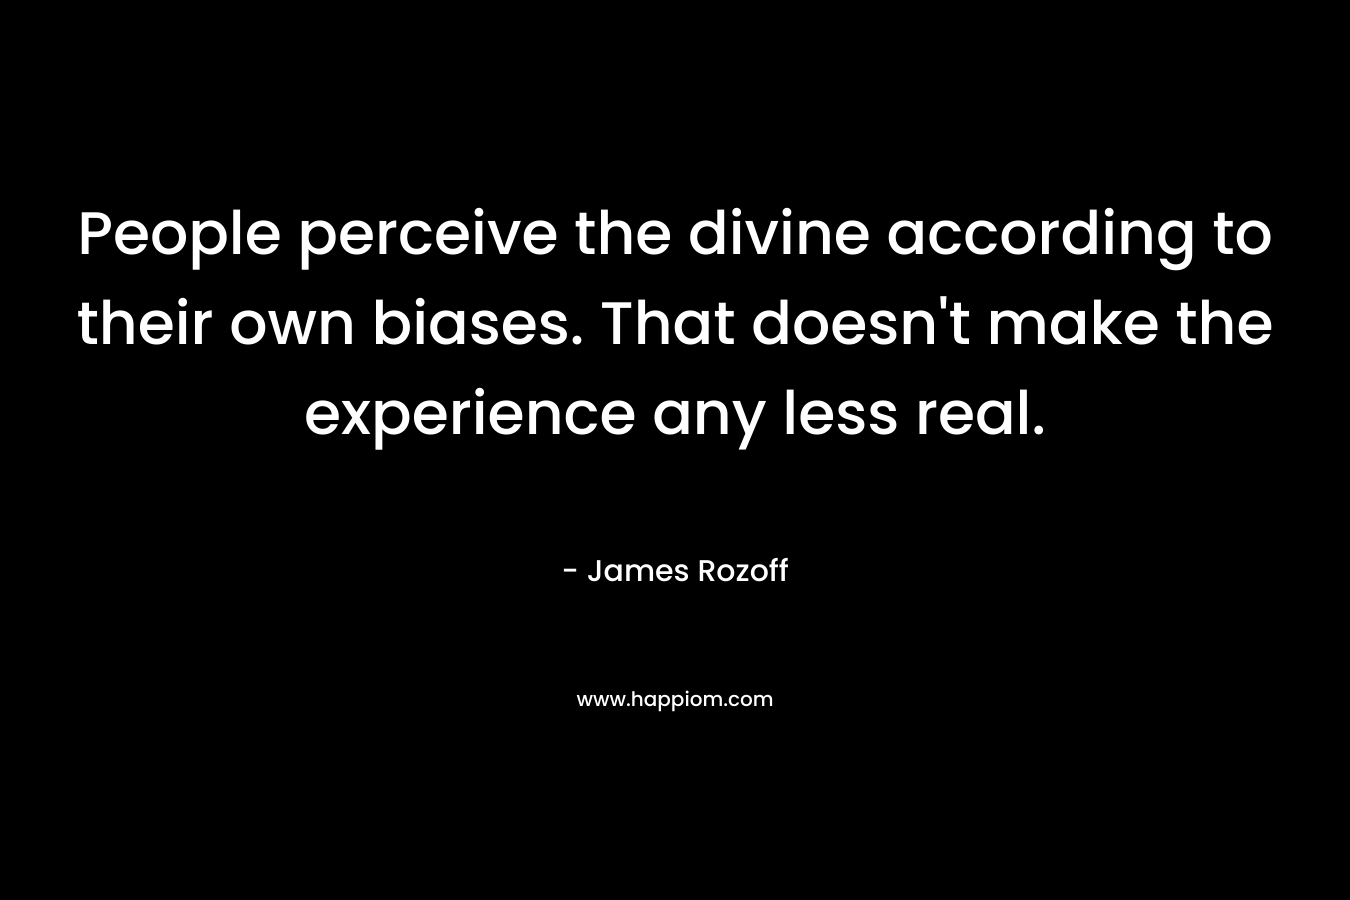 People perceive the divine according to their own biases. That doesn’t make the experience any less real. – James Rozoff